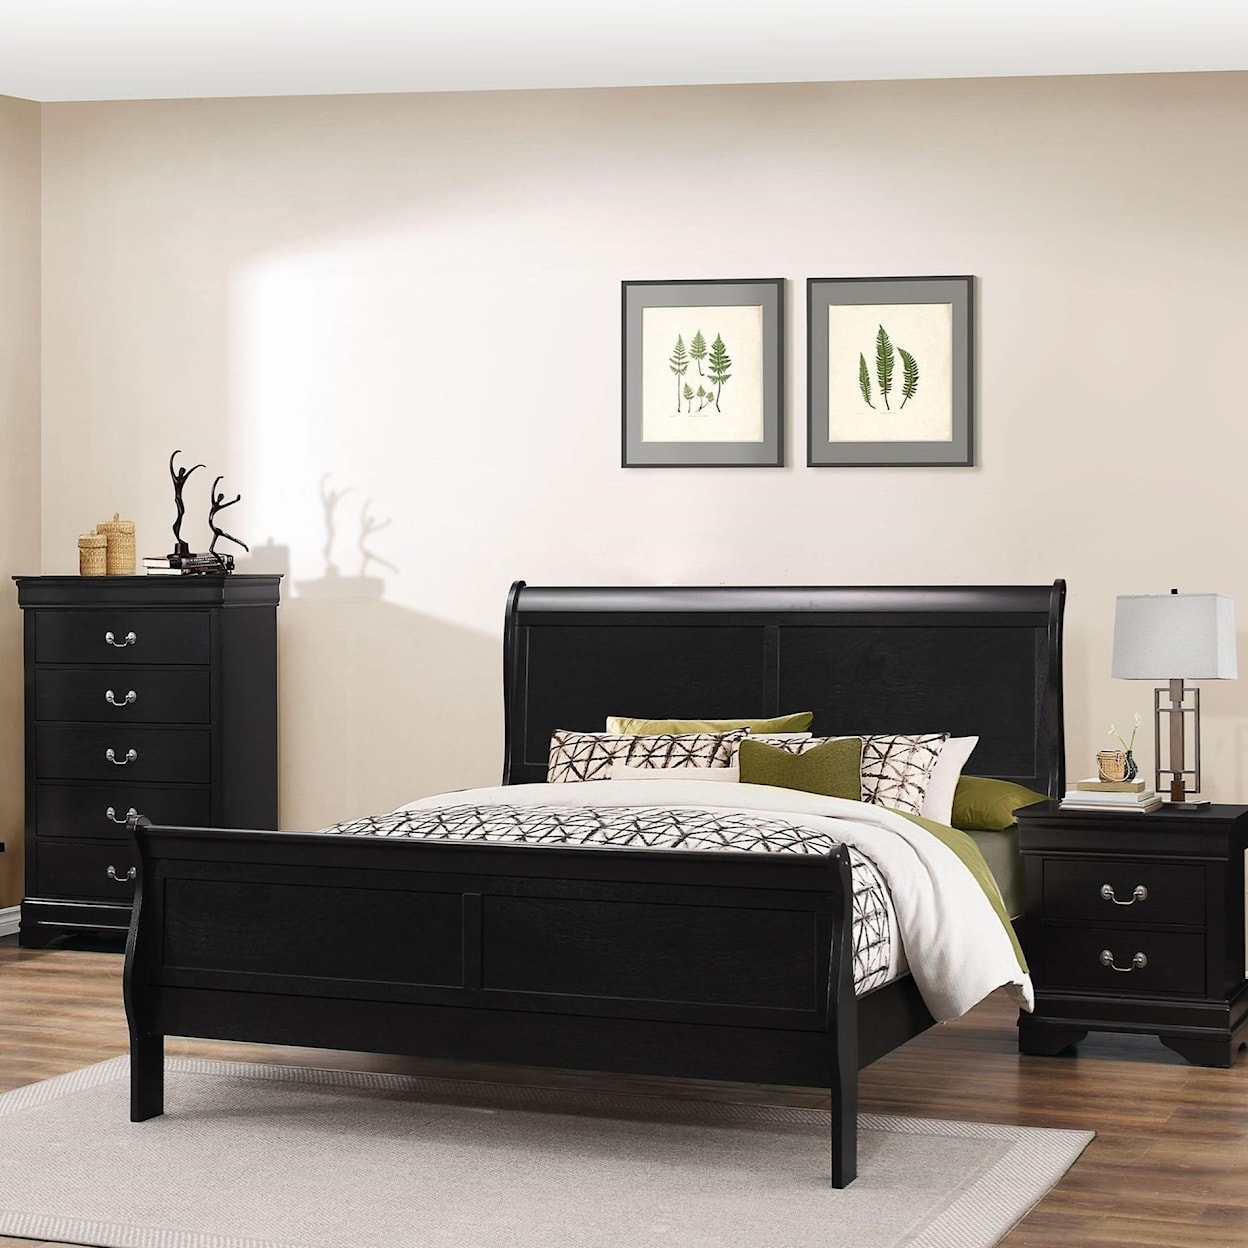 Lifestyle 4937 Queen Sleigh Bed